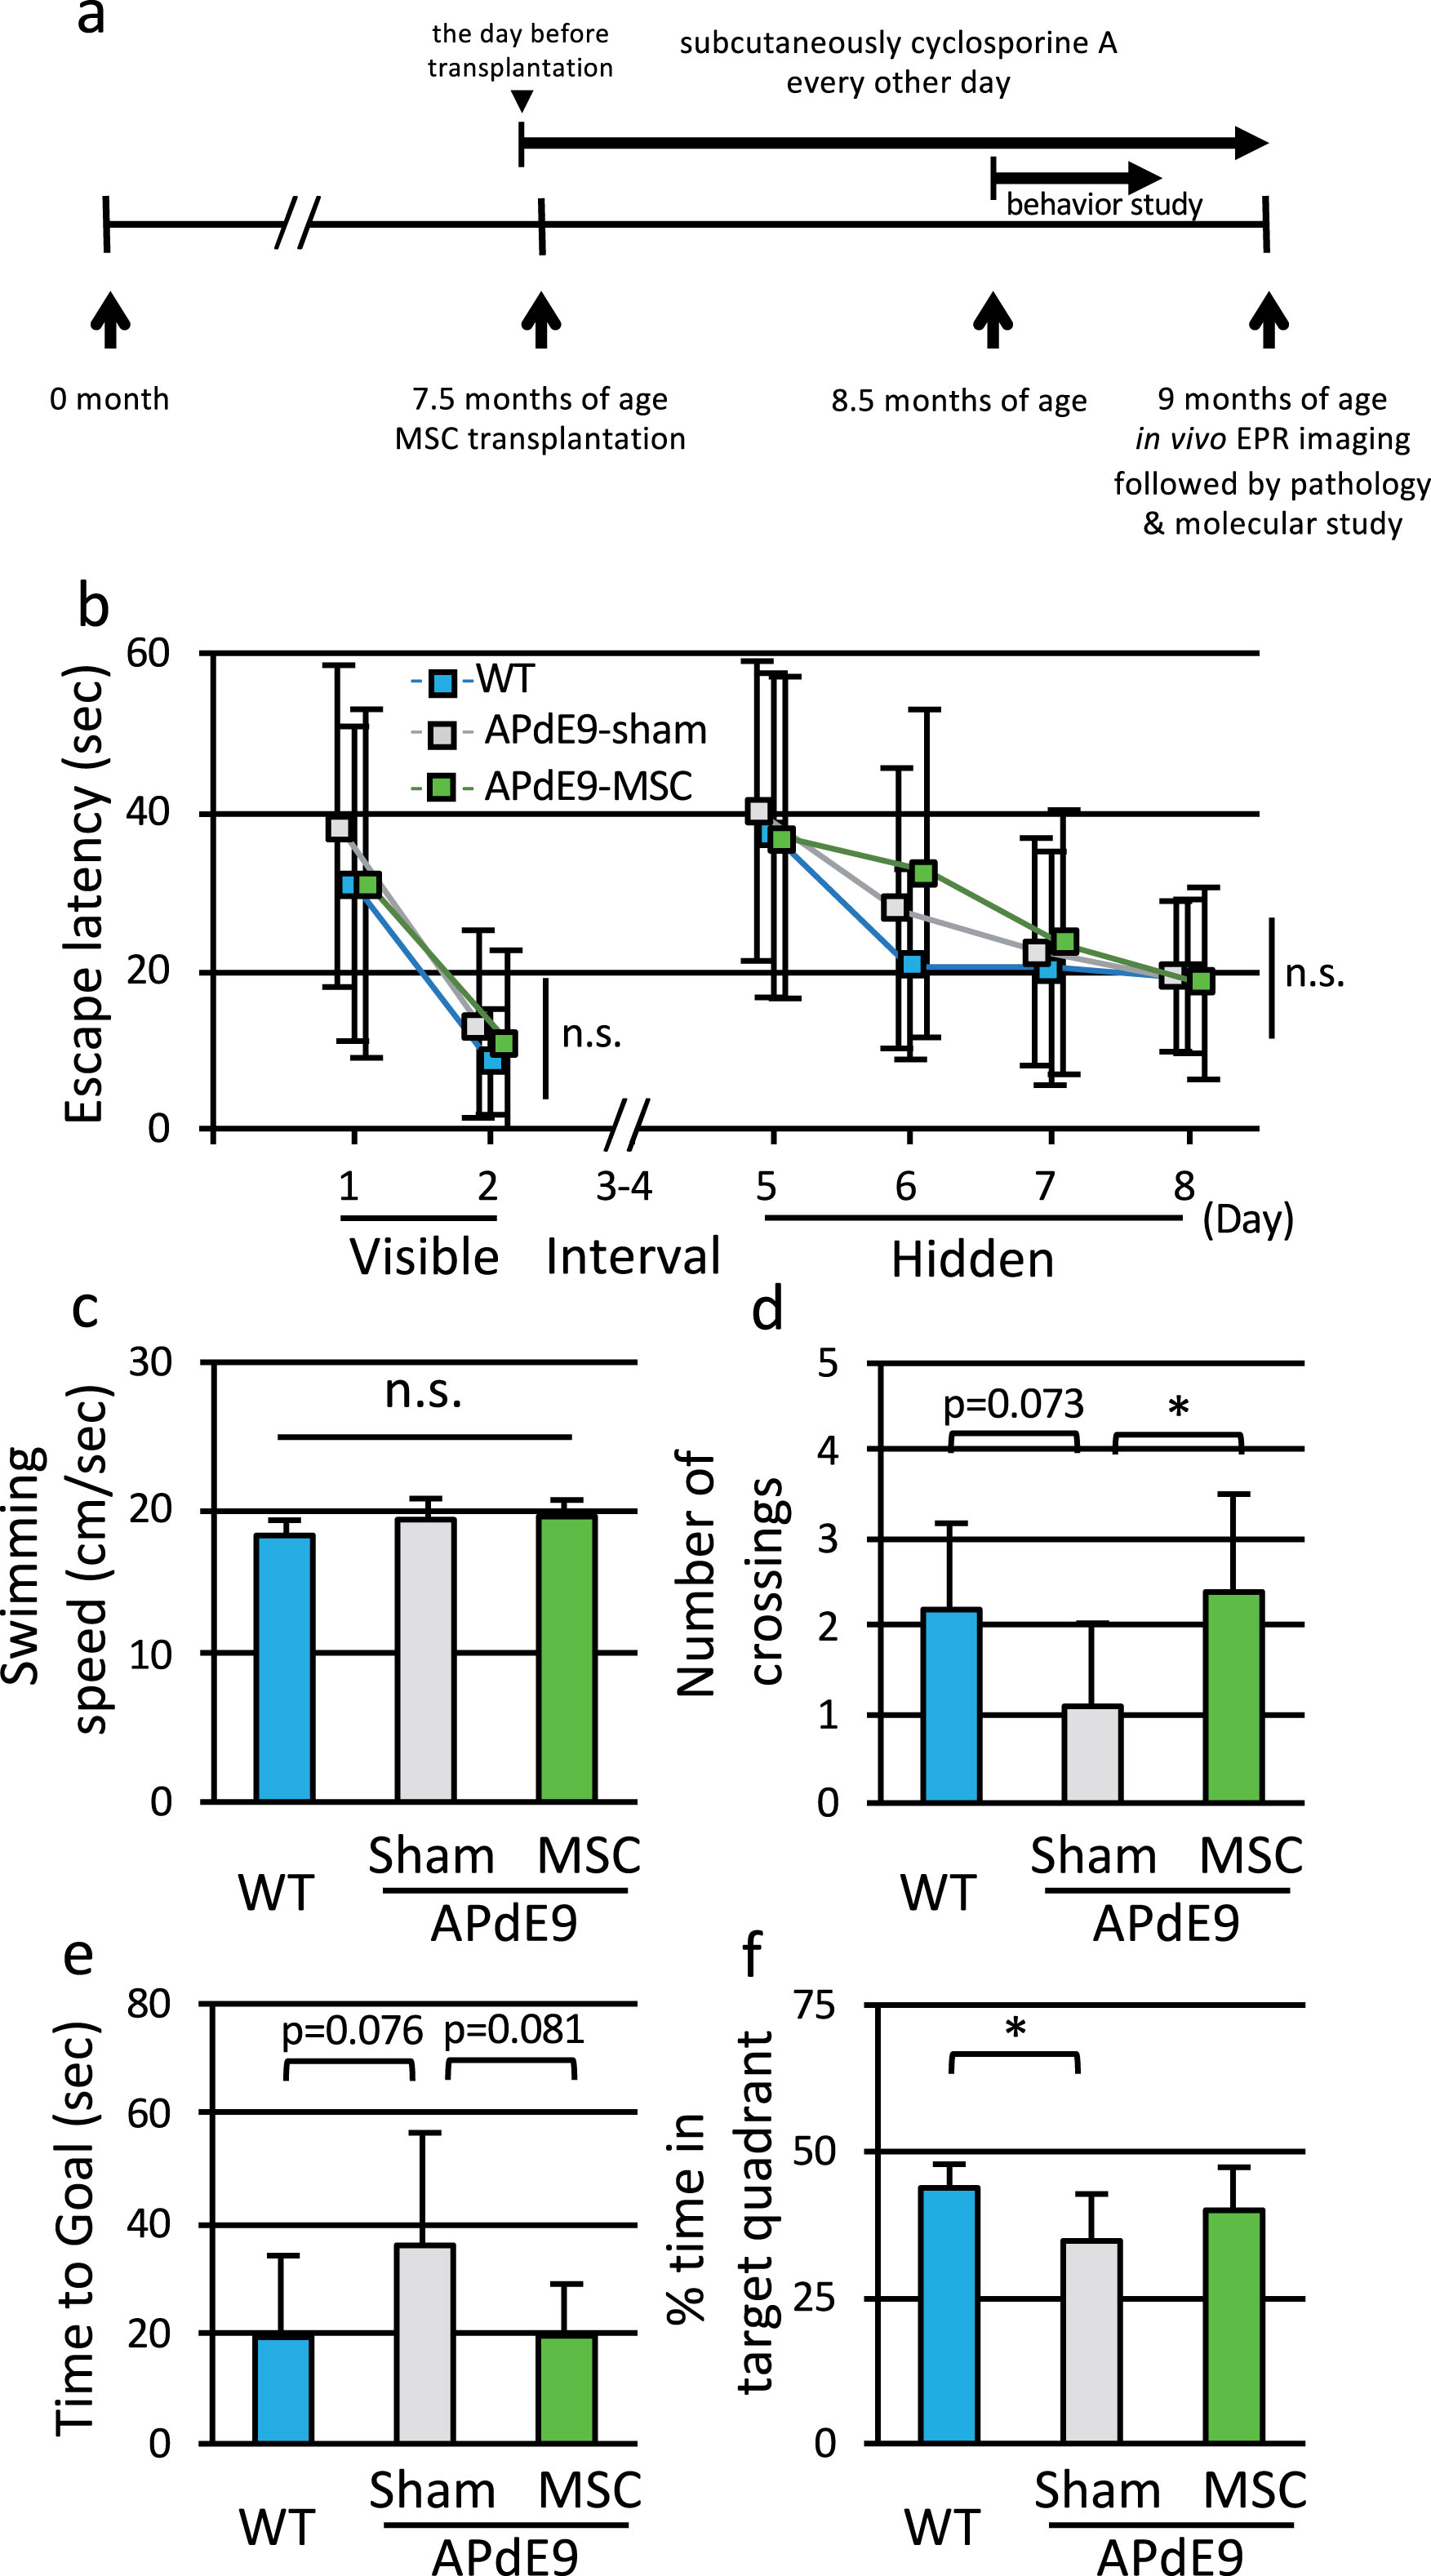 Transplantation of MSC improved spatial memory function of APdE9 mice. a) Schematic diagram of the protocol. To assess spatial learning and memory function, Morris water maze test was performed in WT, APdE9-sham, and APdE9-MSC mice at 8.5 months of age. EPR imaging was performed at 9 months of age. b) Escape latency in the training trials of Morris water maze test for WT mice, APdE9-sham mice, and APdE9-MSC mice. c) Swimming speed in the probe trial of Morris water maze test for three groups of mice. d) Number of crossing through the area where the platform was located, e) latency to reach where the platform was located, and f) percentage of time spent in target quadrant in the probe trial of Morris water maze test (n = 10 for each group).